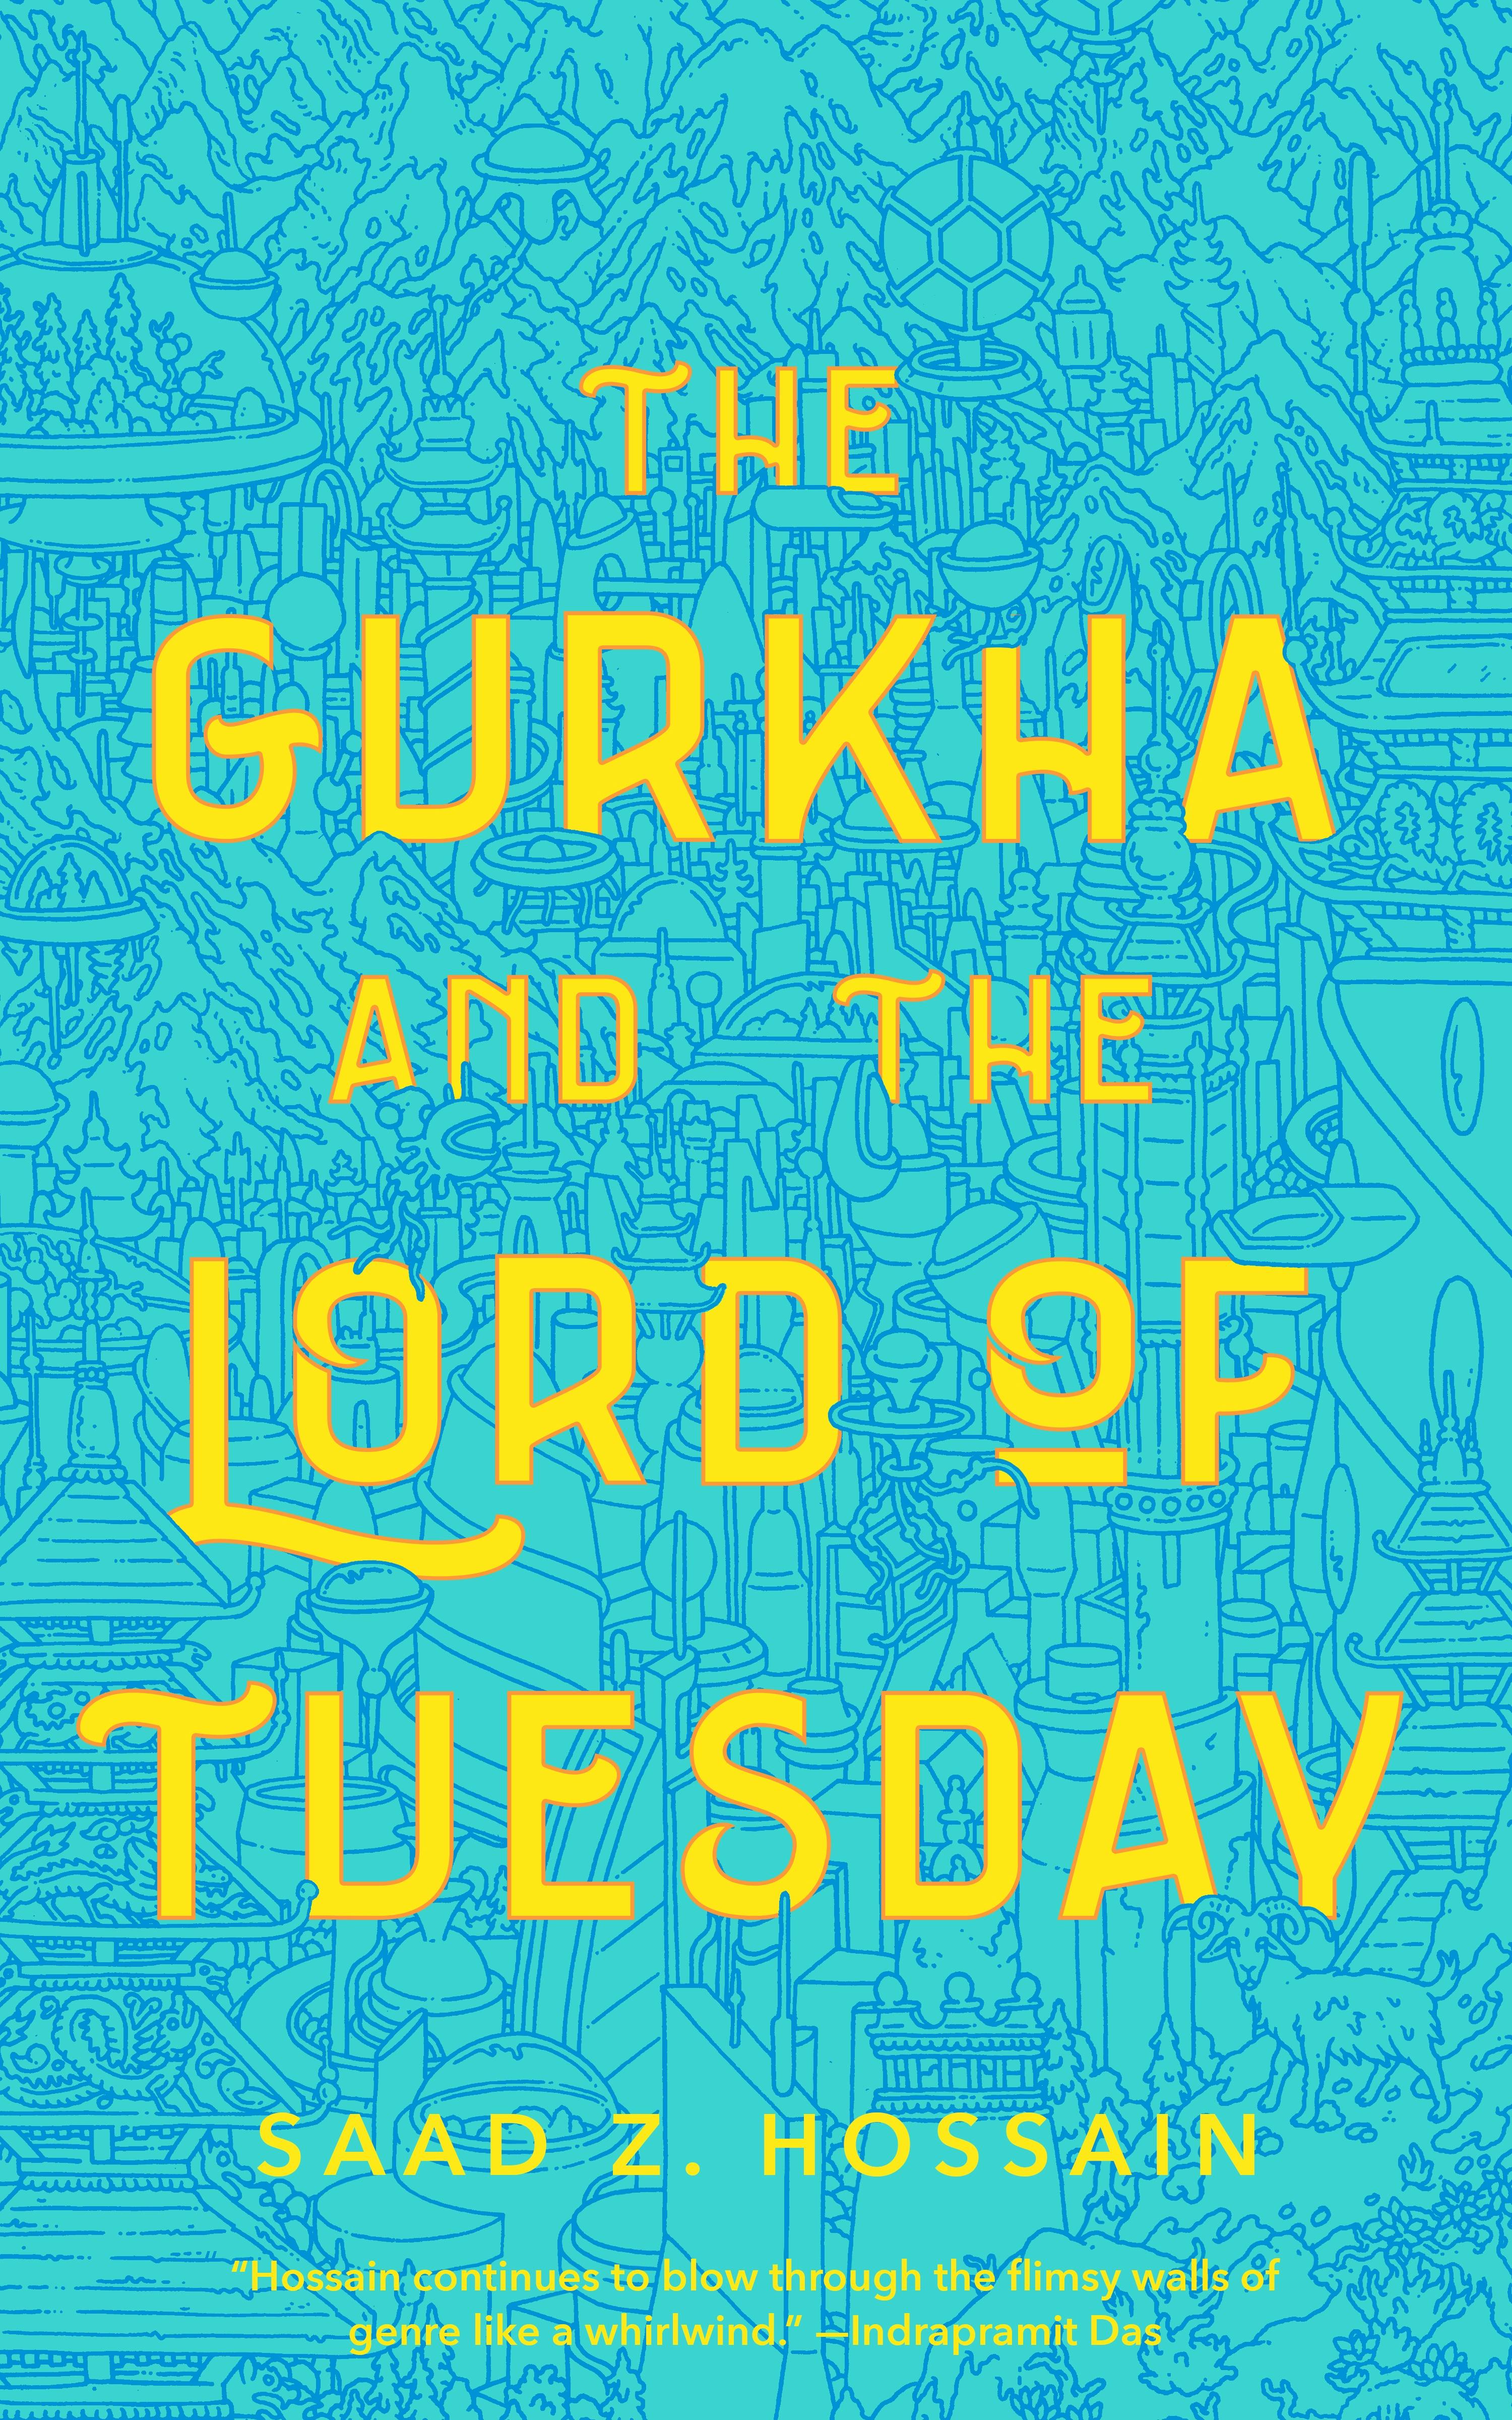 Cover for the book titled as: The Gurkha and the Lord of Tuesday